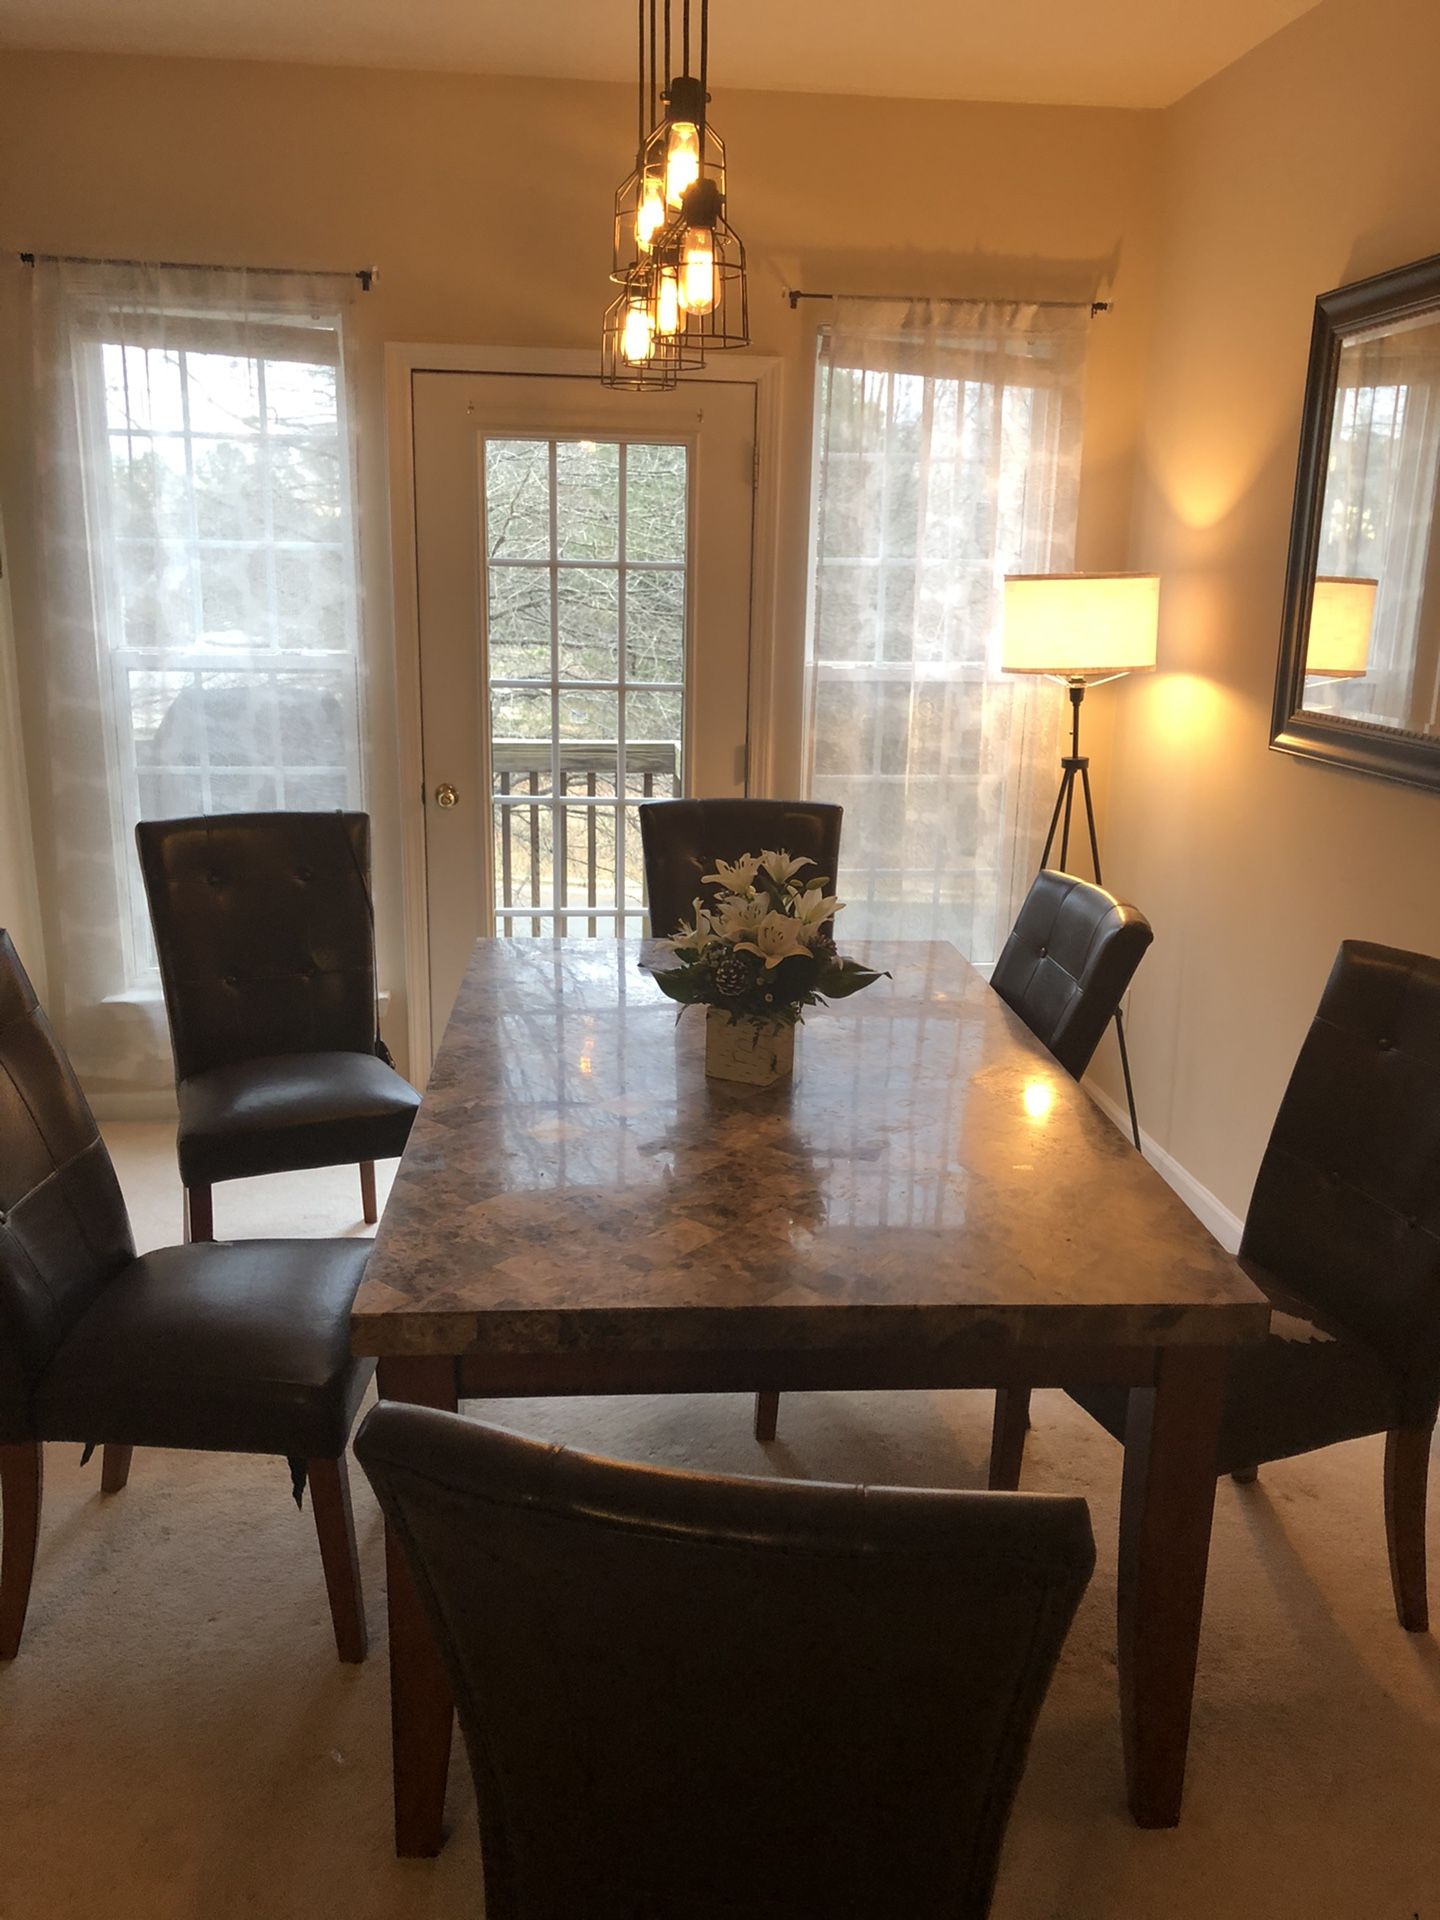 Marble like dining/kitchen table with 6 chairs